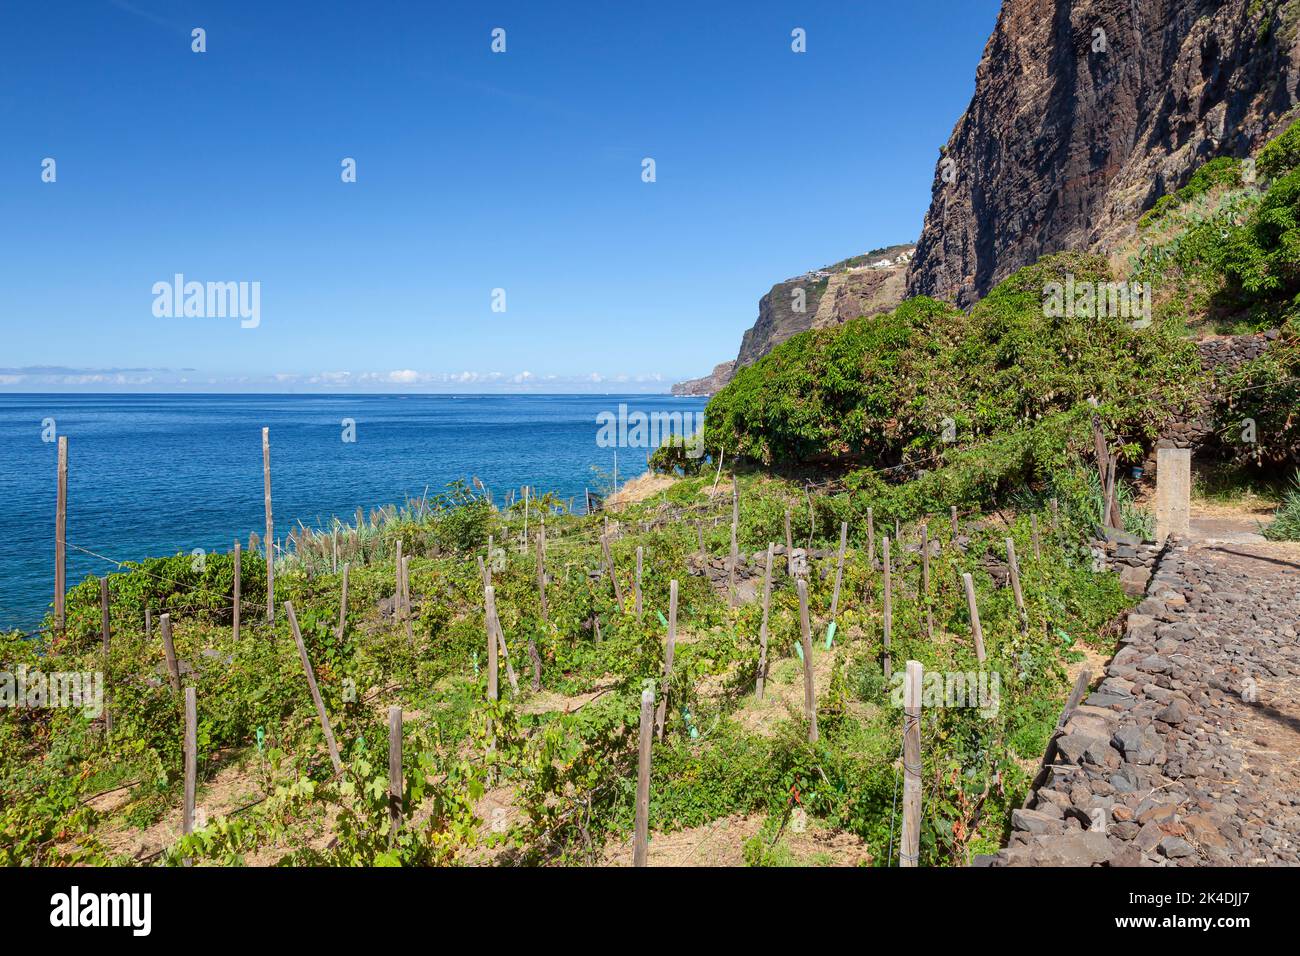 Bunches of grapes in the wine and fruit growing area of Fajã dos Padres, Madeira, Portugal, Europe Stock Photo